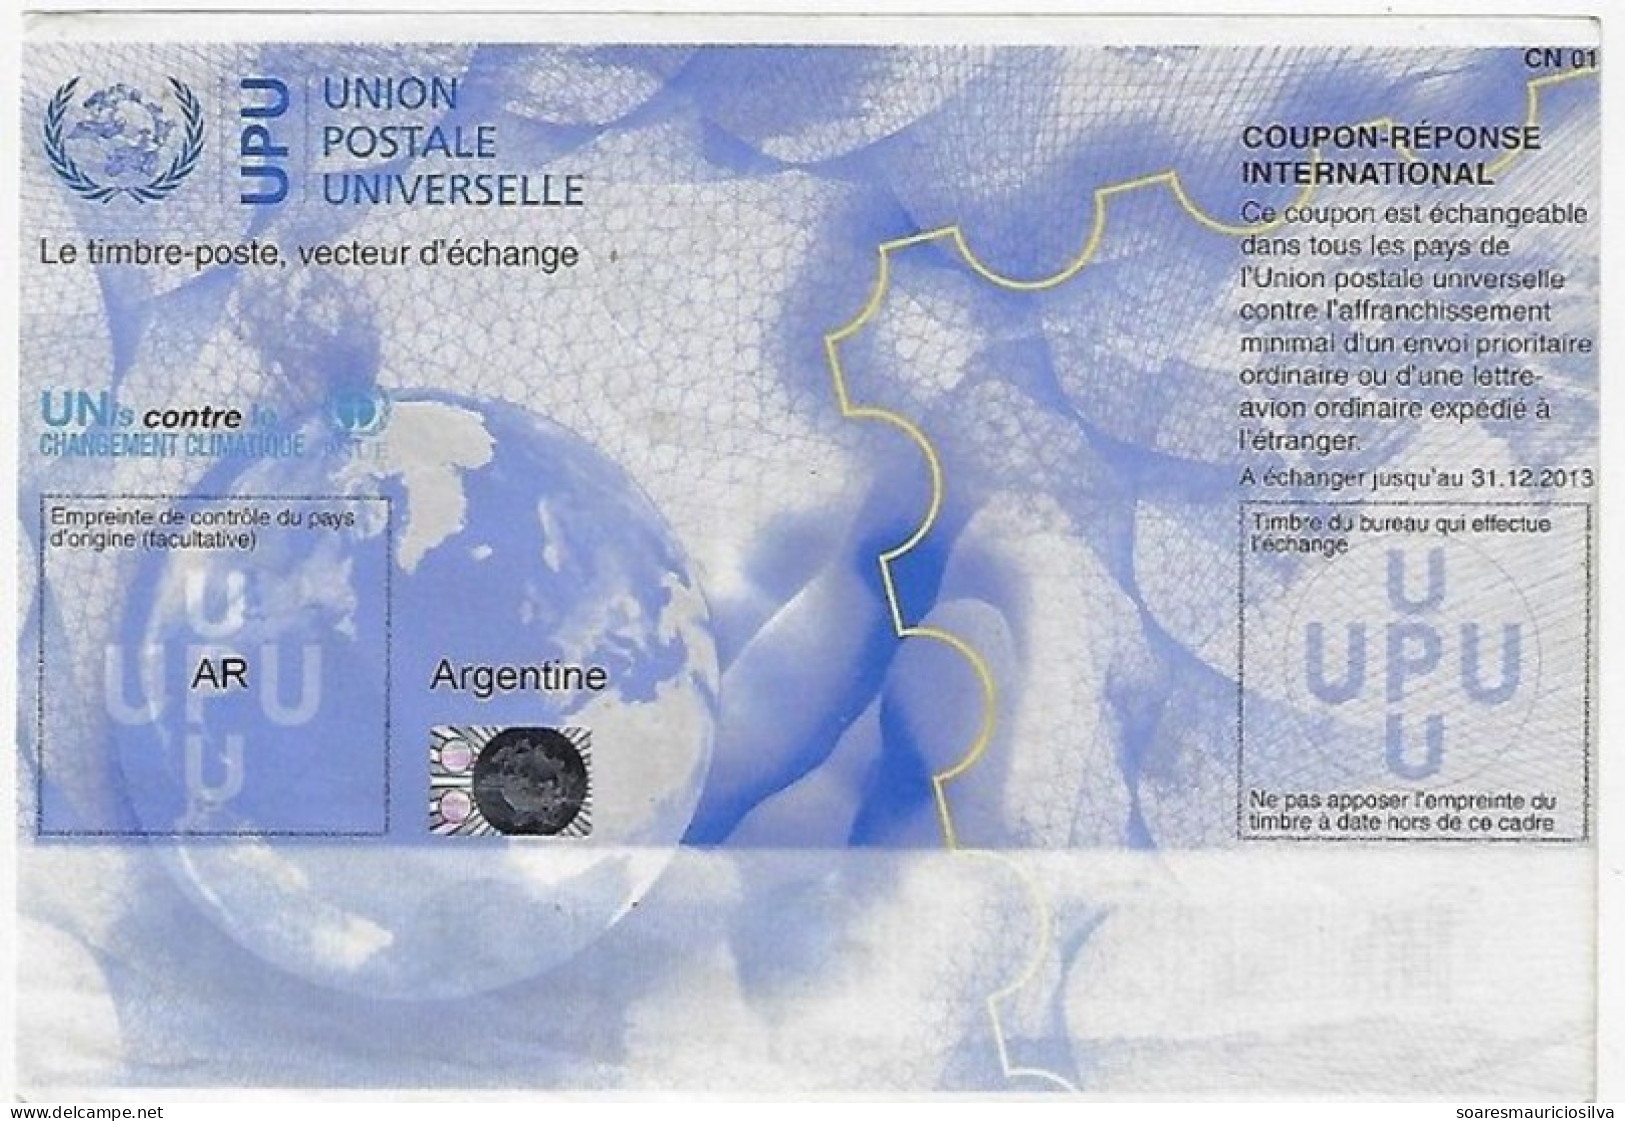 Argentina 2013 International Reply Coupon Reponse UPU United Nations Against Climate Change Terrestrial Globe Hand - Covers & Documents